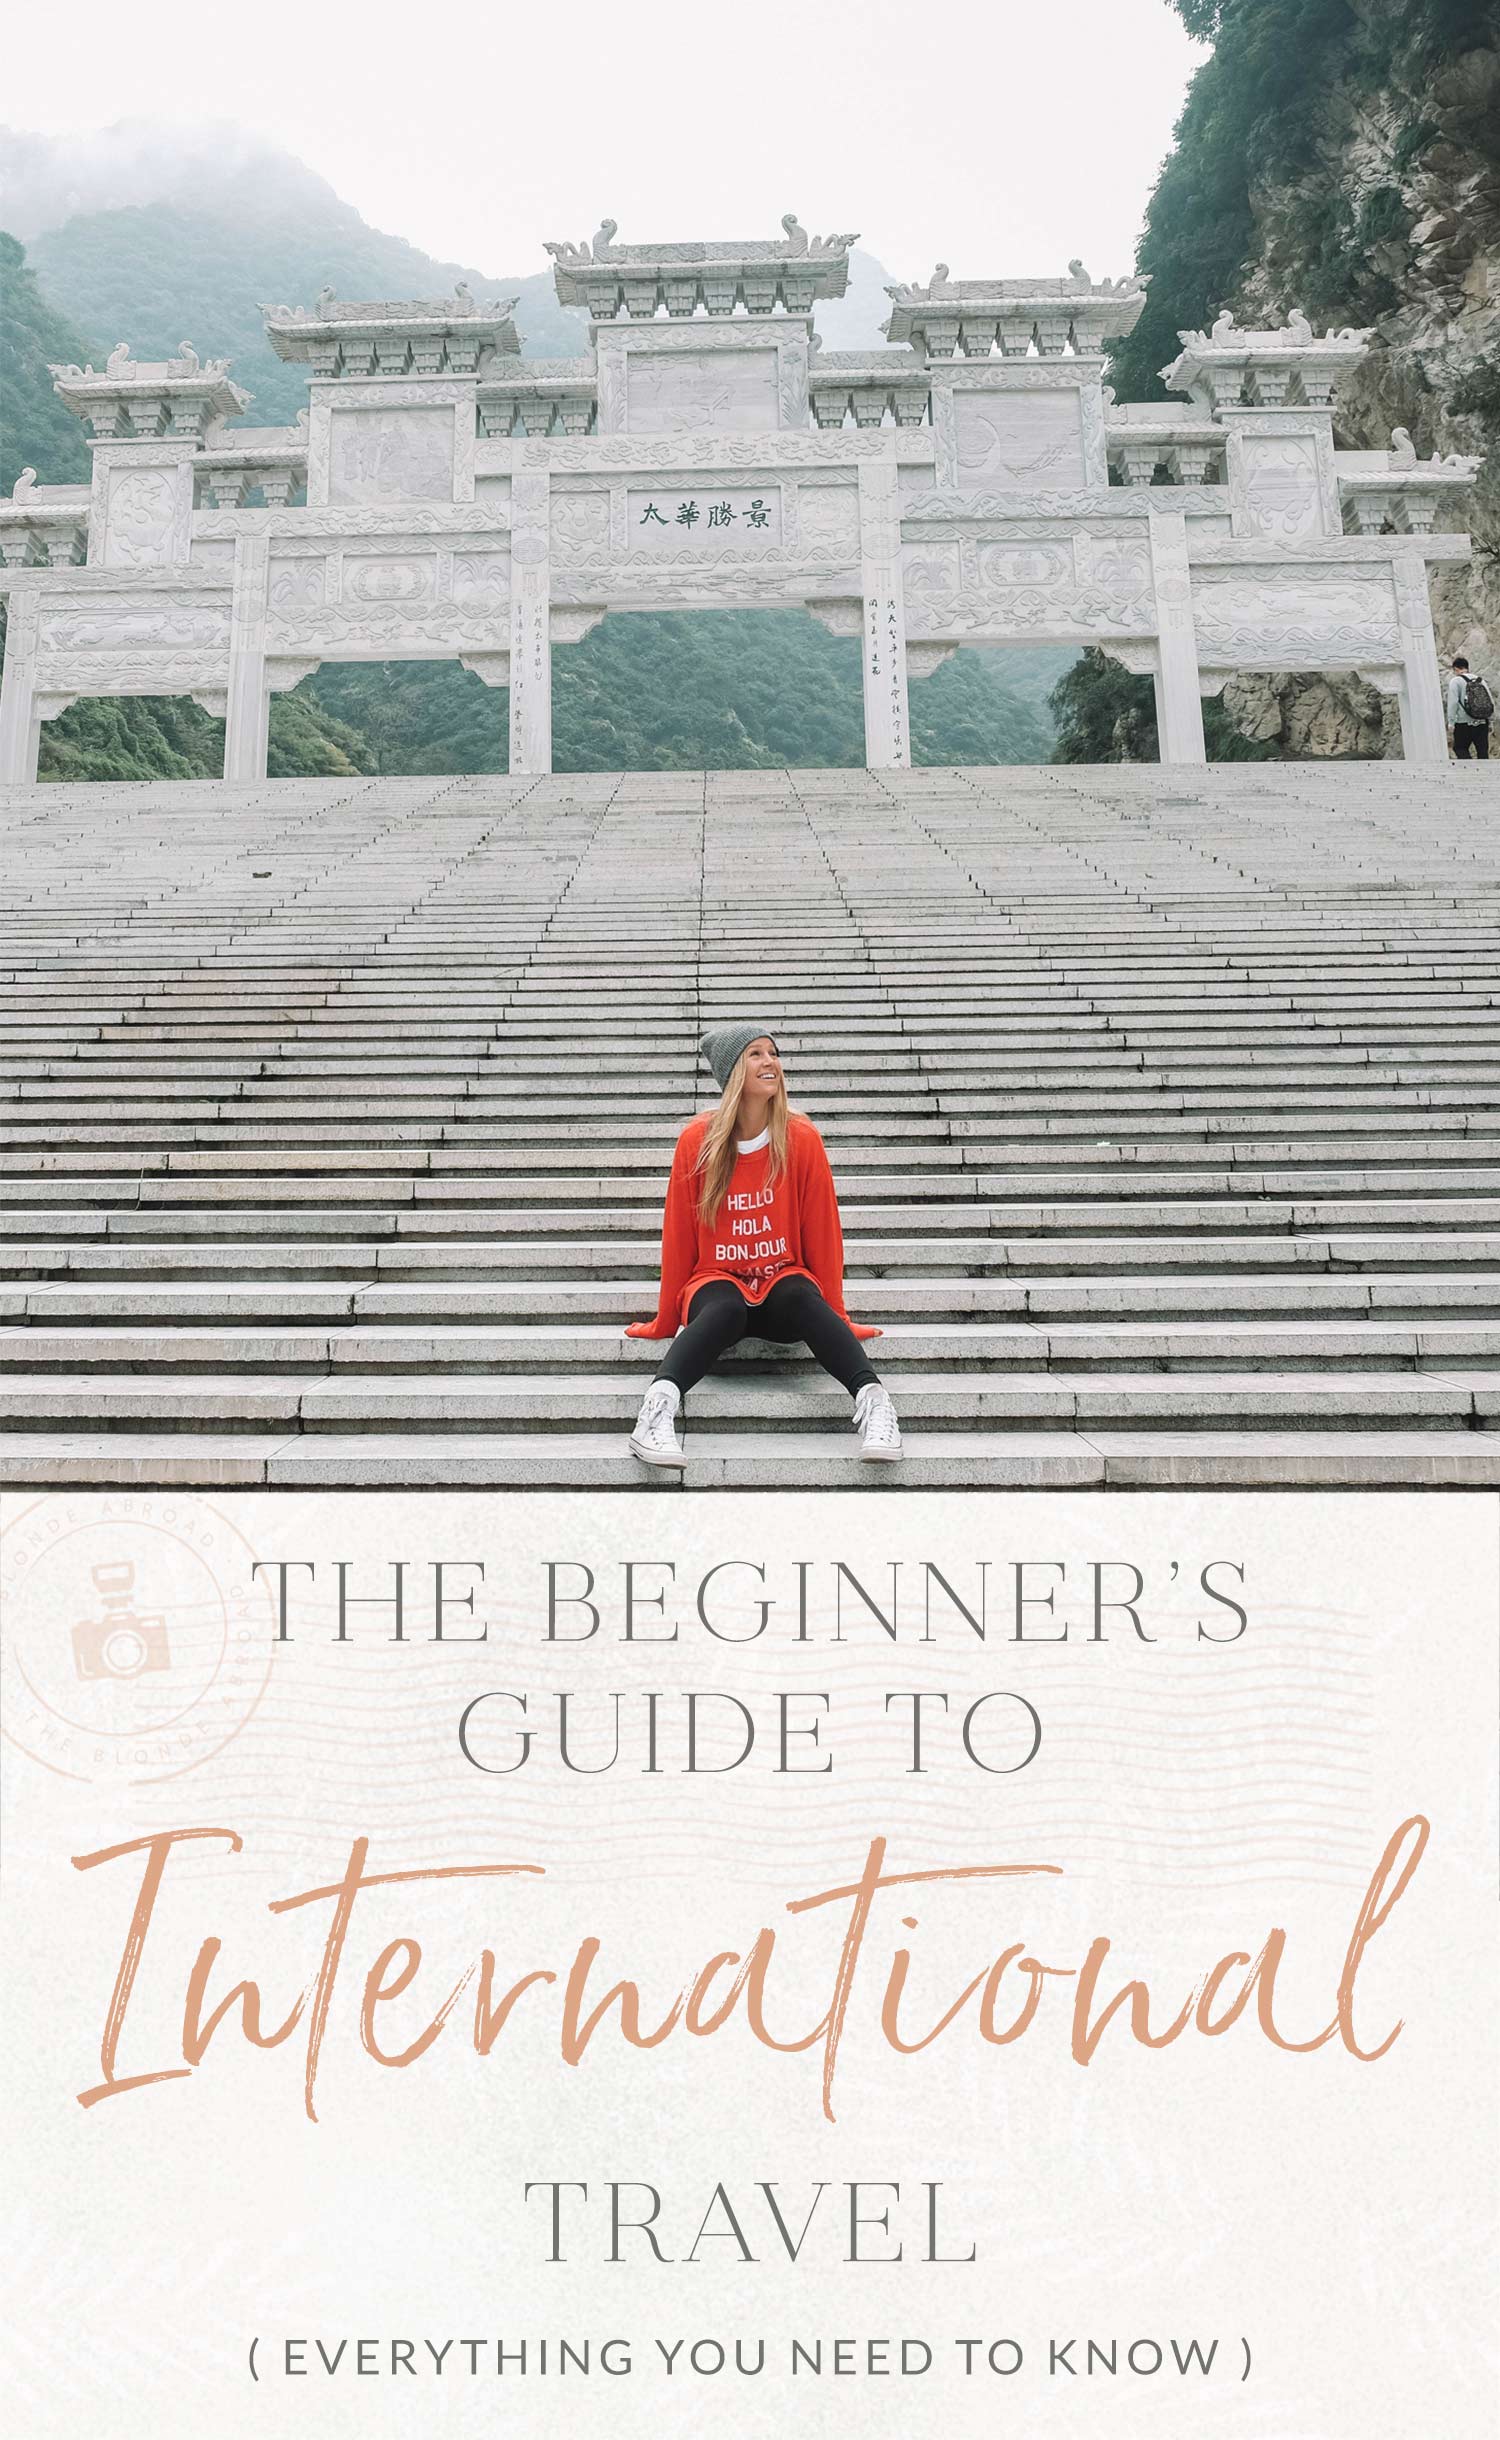 The beginners guide to international travel